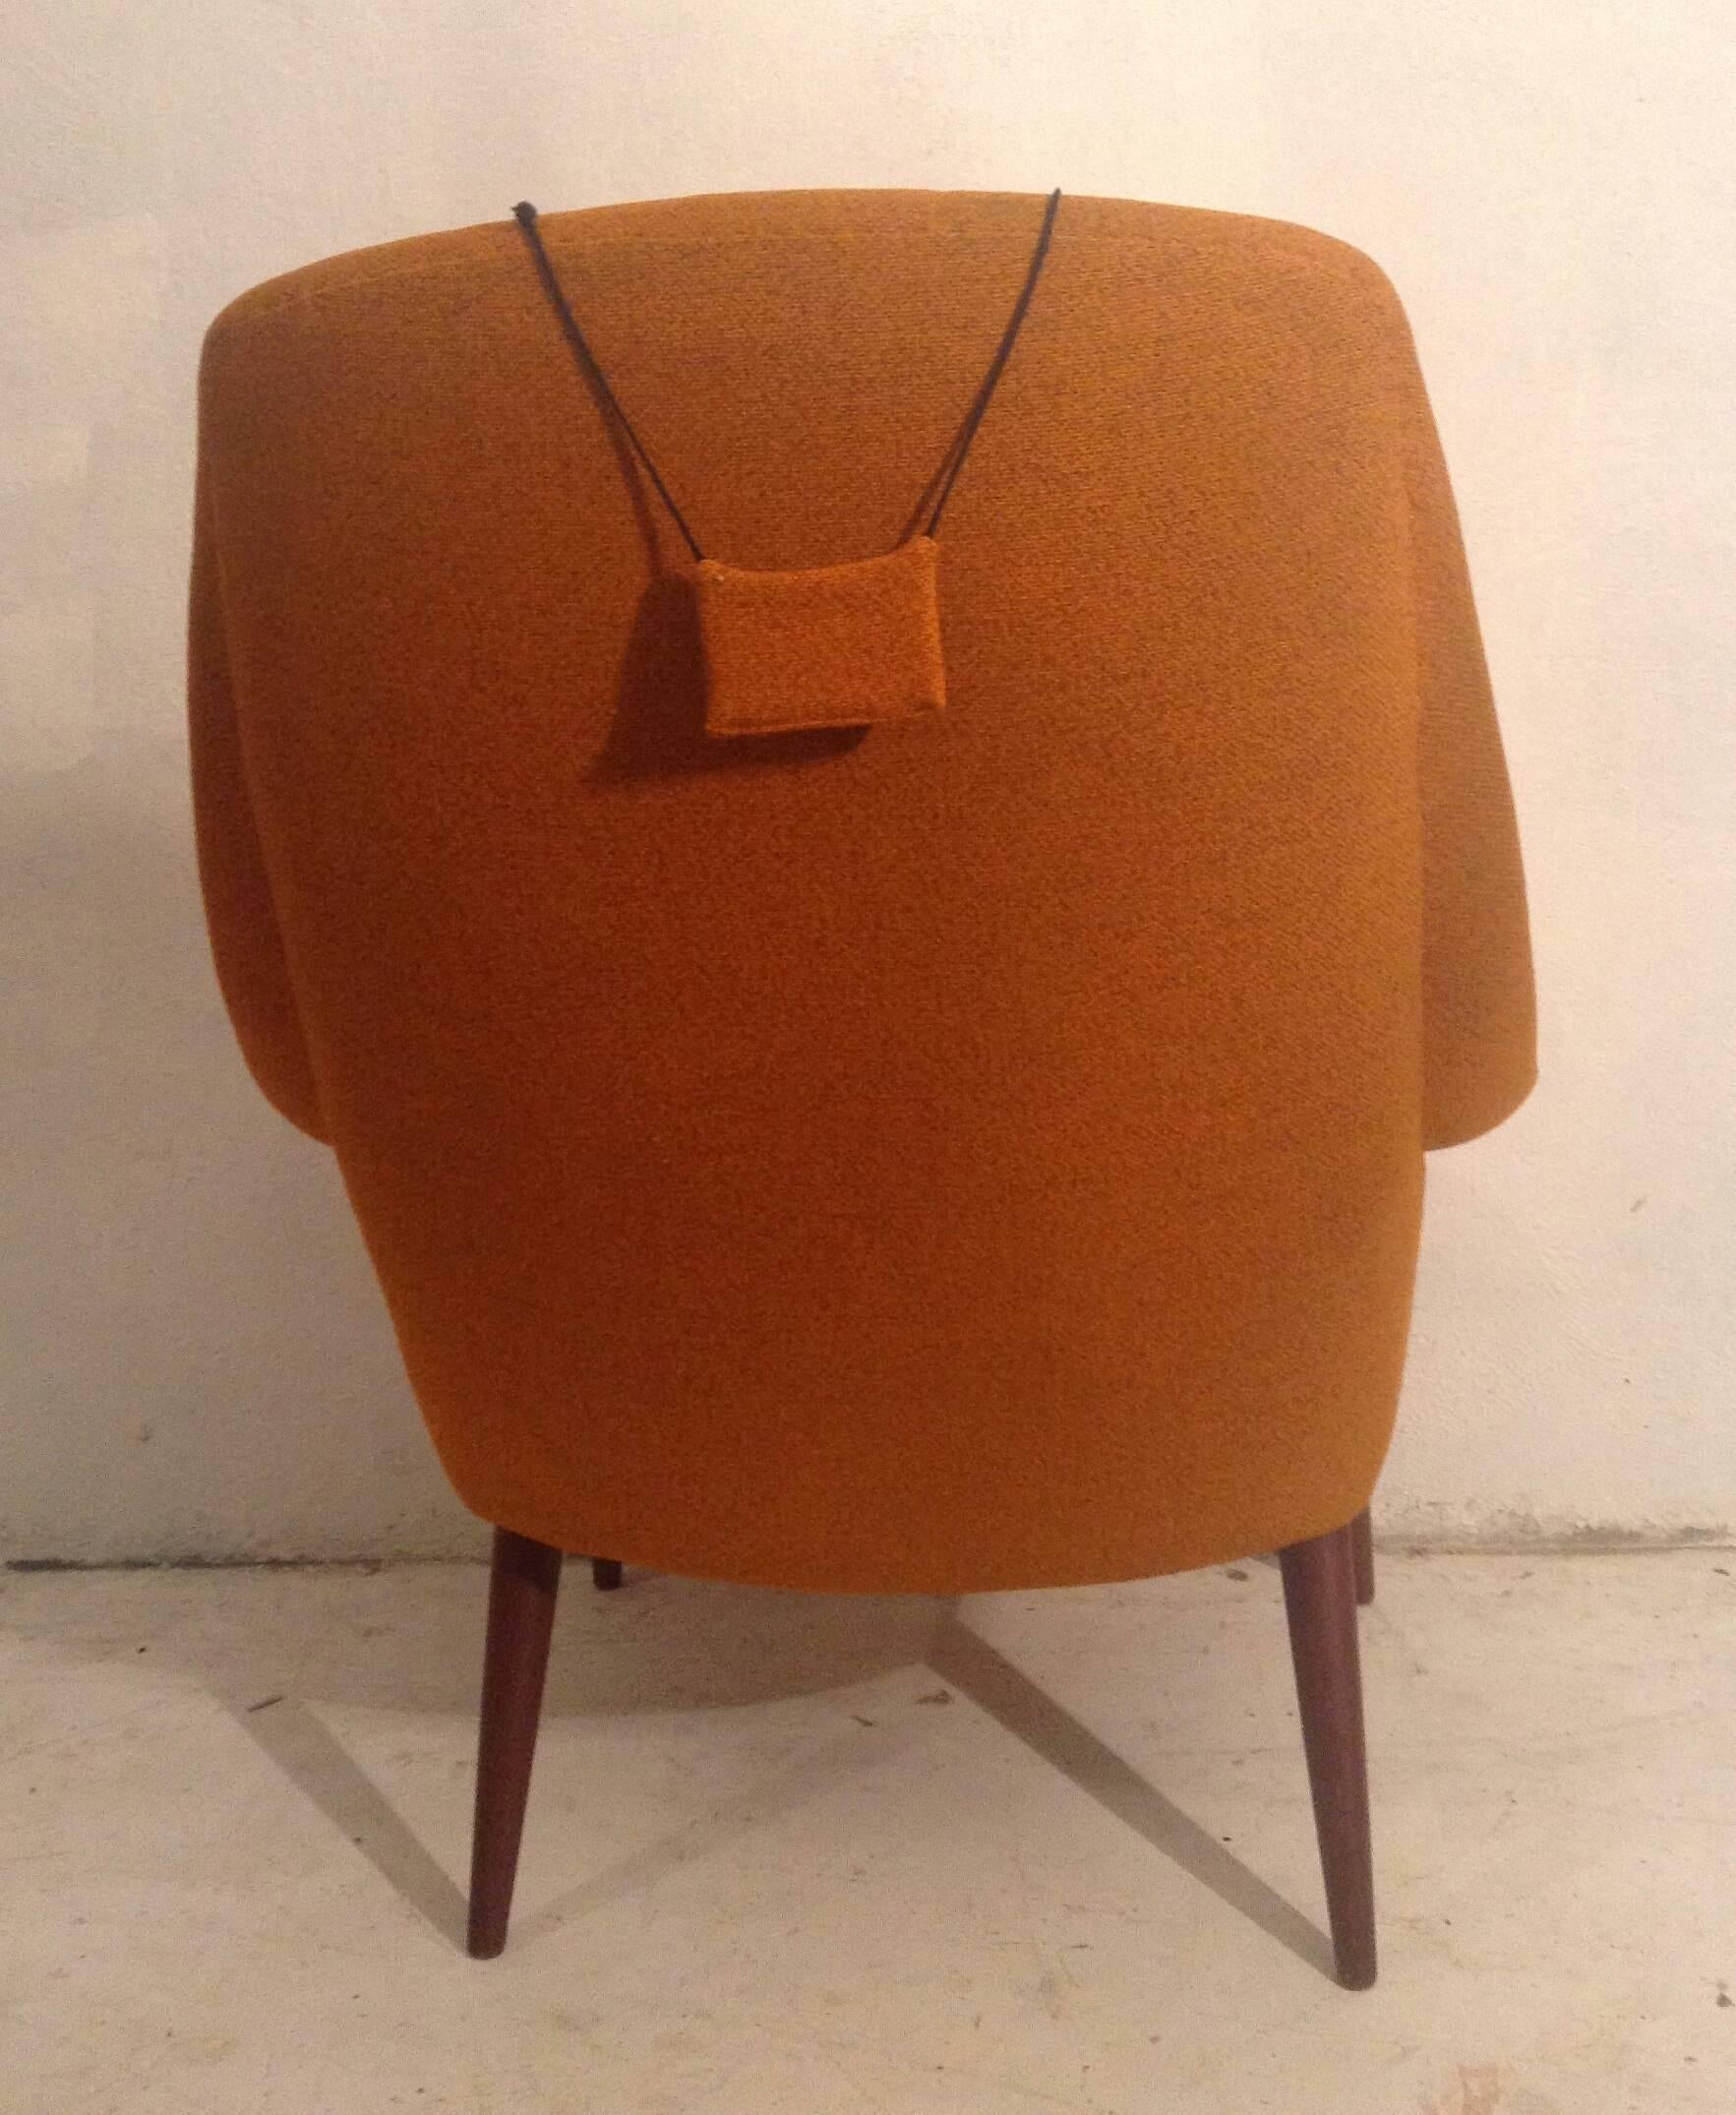 A rare chair, by uncommon maker. Beautiful Mid-Century Scandinavian form designed by Gerhard Berg, made in Sykkylven Norway. Over all, nice original condition, retains original tangerine orange wool fabric, teak arms and conical legs, extremely